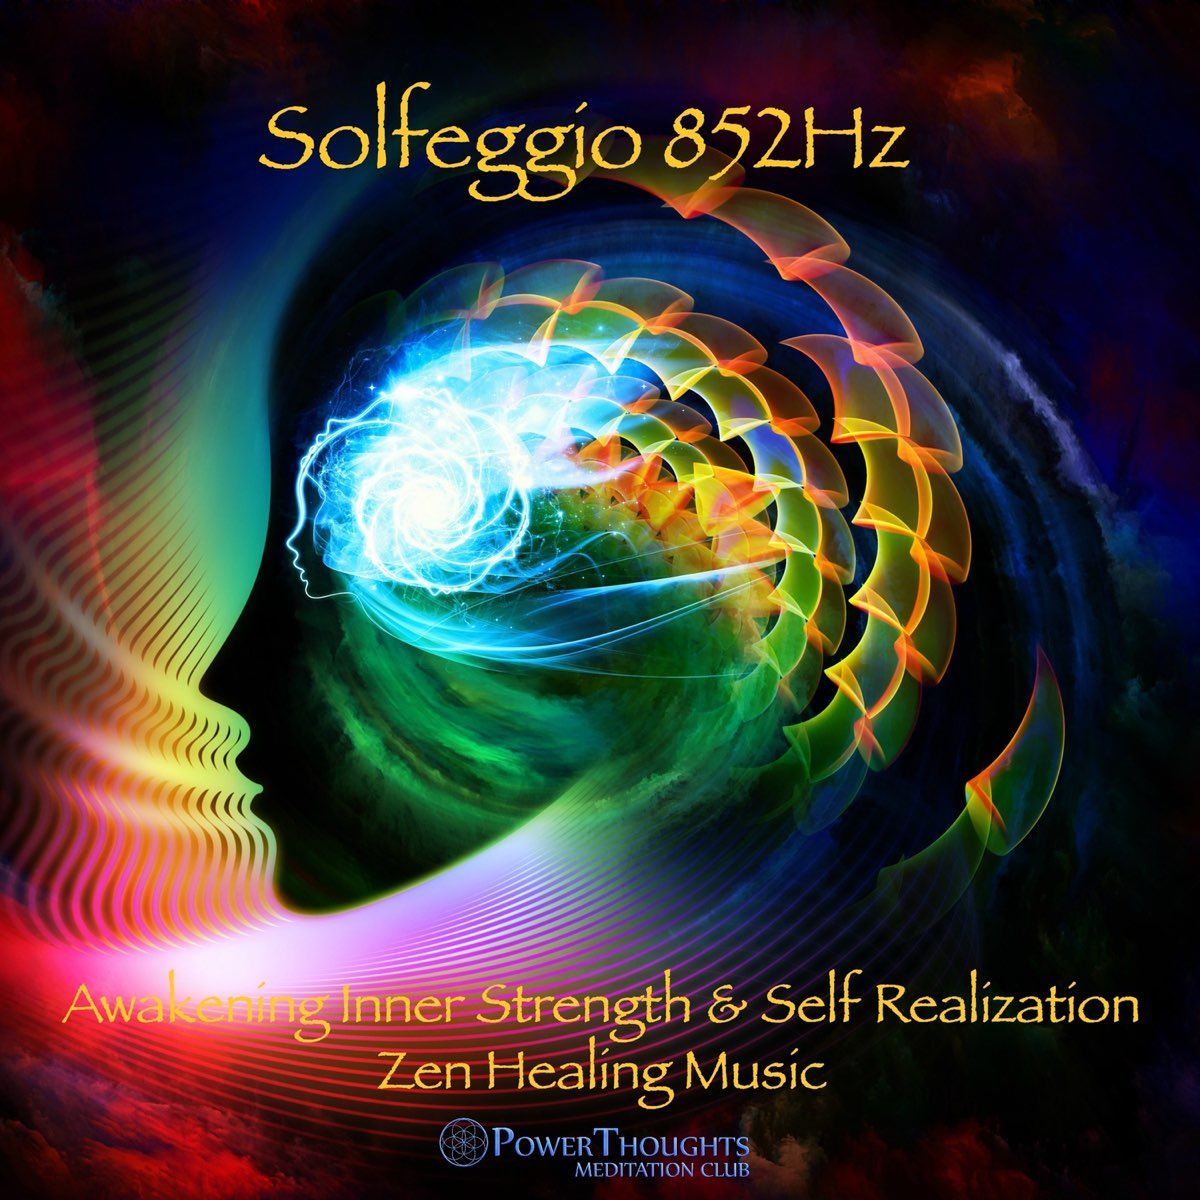 How to Use Music Frequencies to Heal Yourself